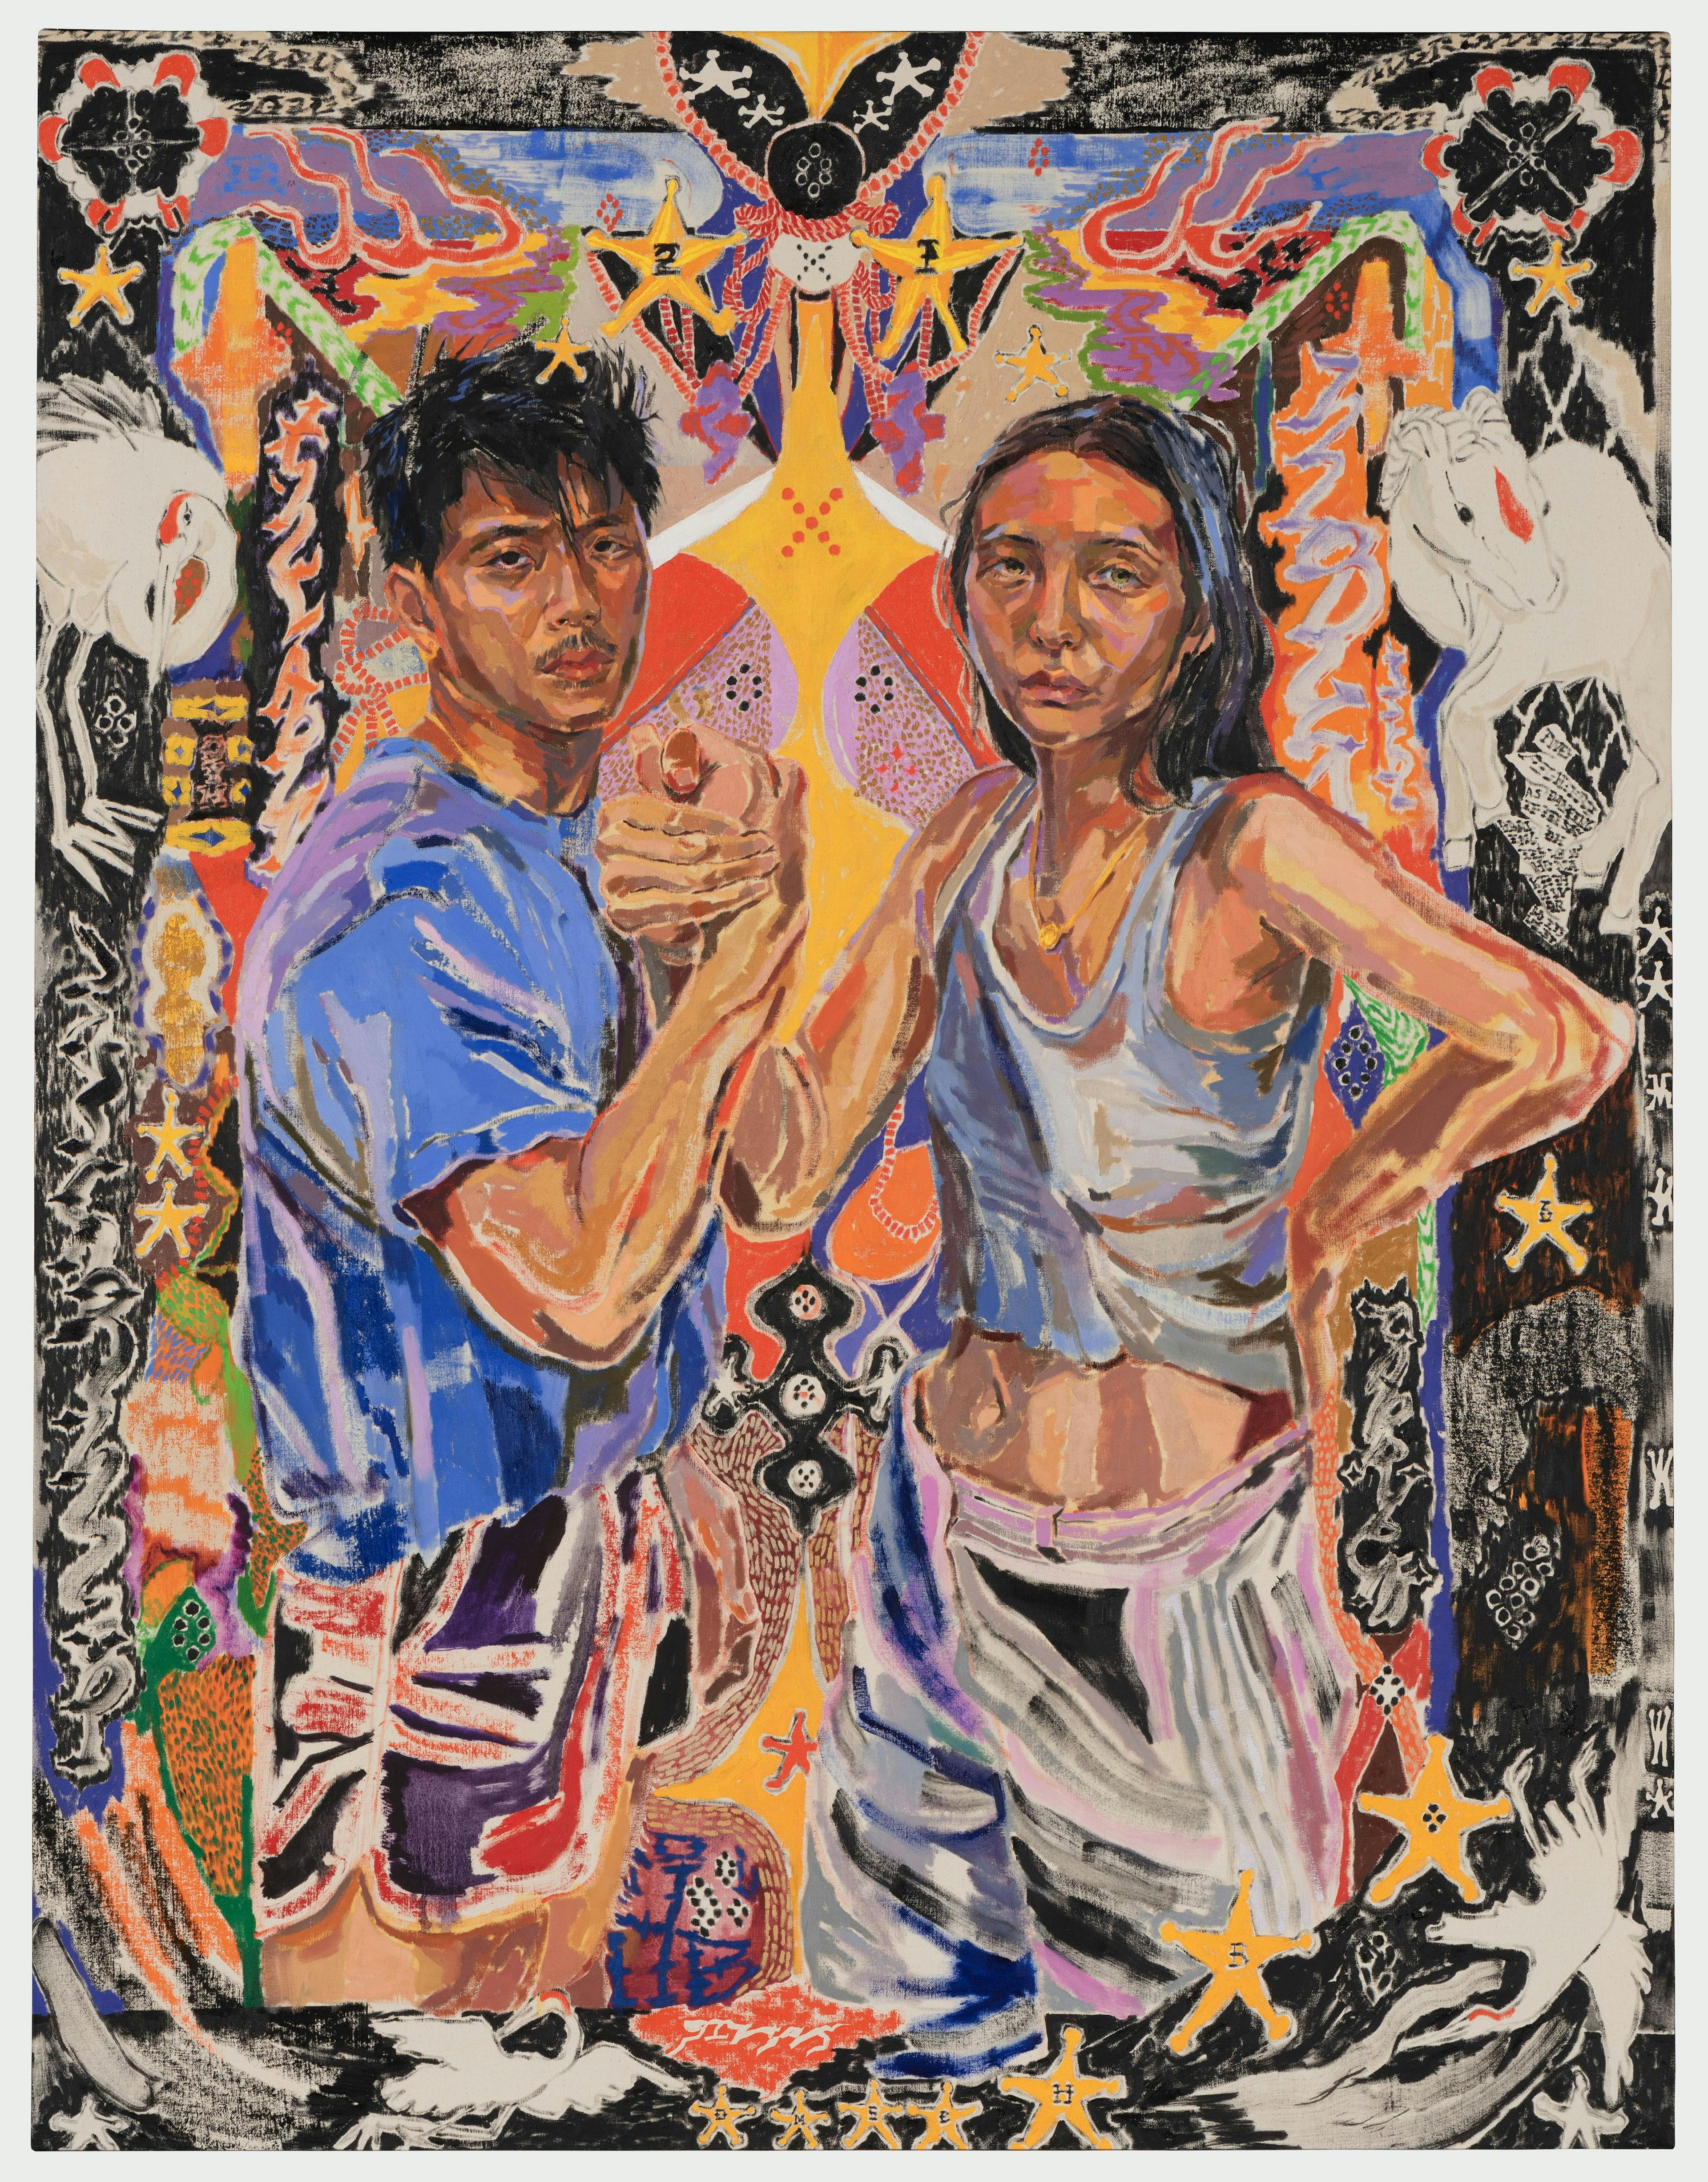 Oscar yi Hou (born Liverpool, UK, 1998). 'The Arm Wrestle of Chip & Spike; aka: Star-Makers,' 2020. Oil on canvas, 55 1⁄2" × 43". Brooklyn Museum; Purchase gift of Scott Rofey and Olivia Song, 2021. 45. © Oscar yi Hou. Photography by Jason Mandella, courtesy of James Fuentes LLC.